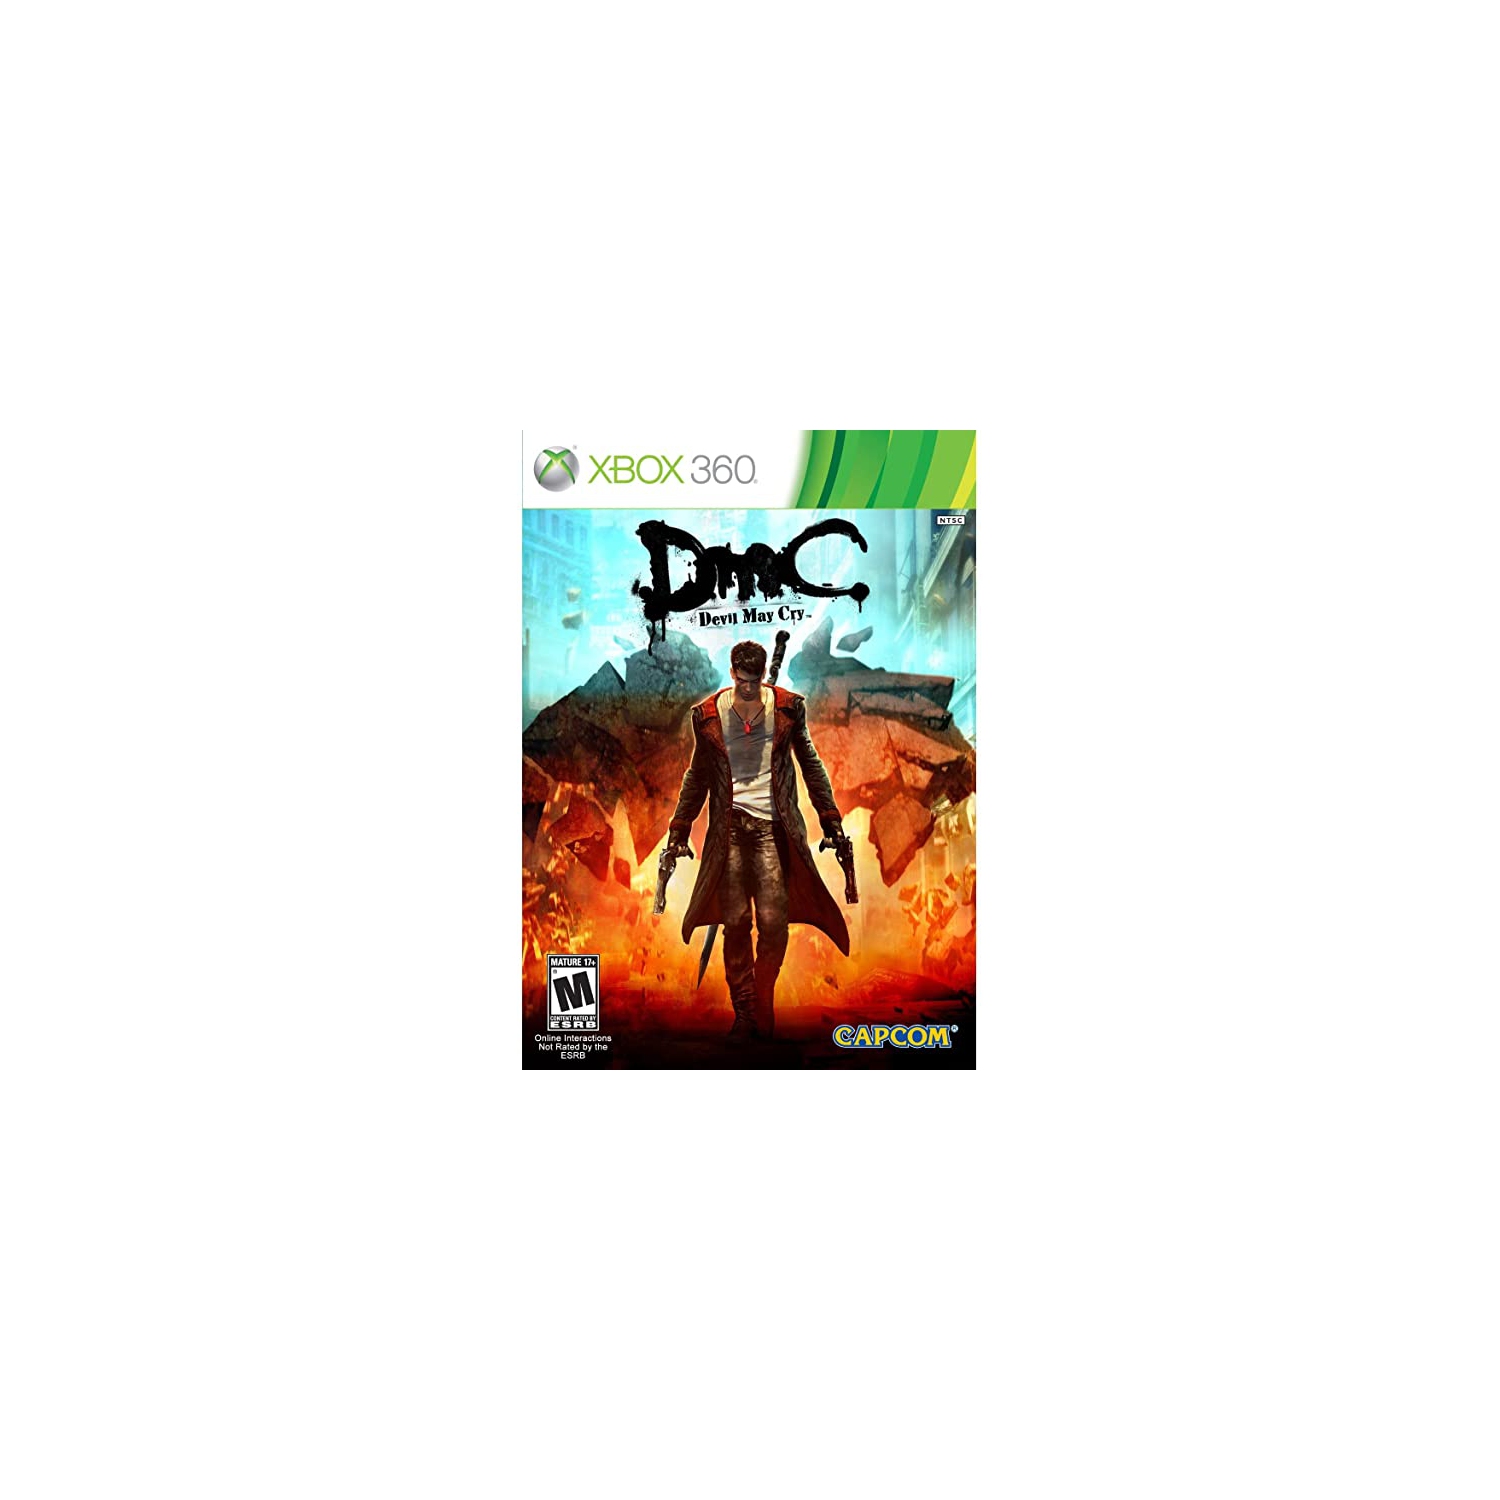 Previously Played - DMC Devil May Cry (XBOX 360)